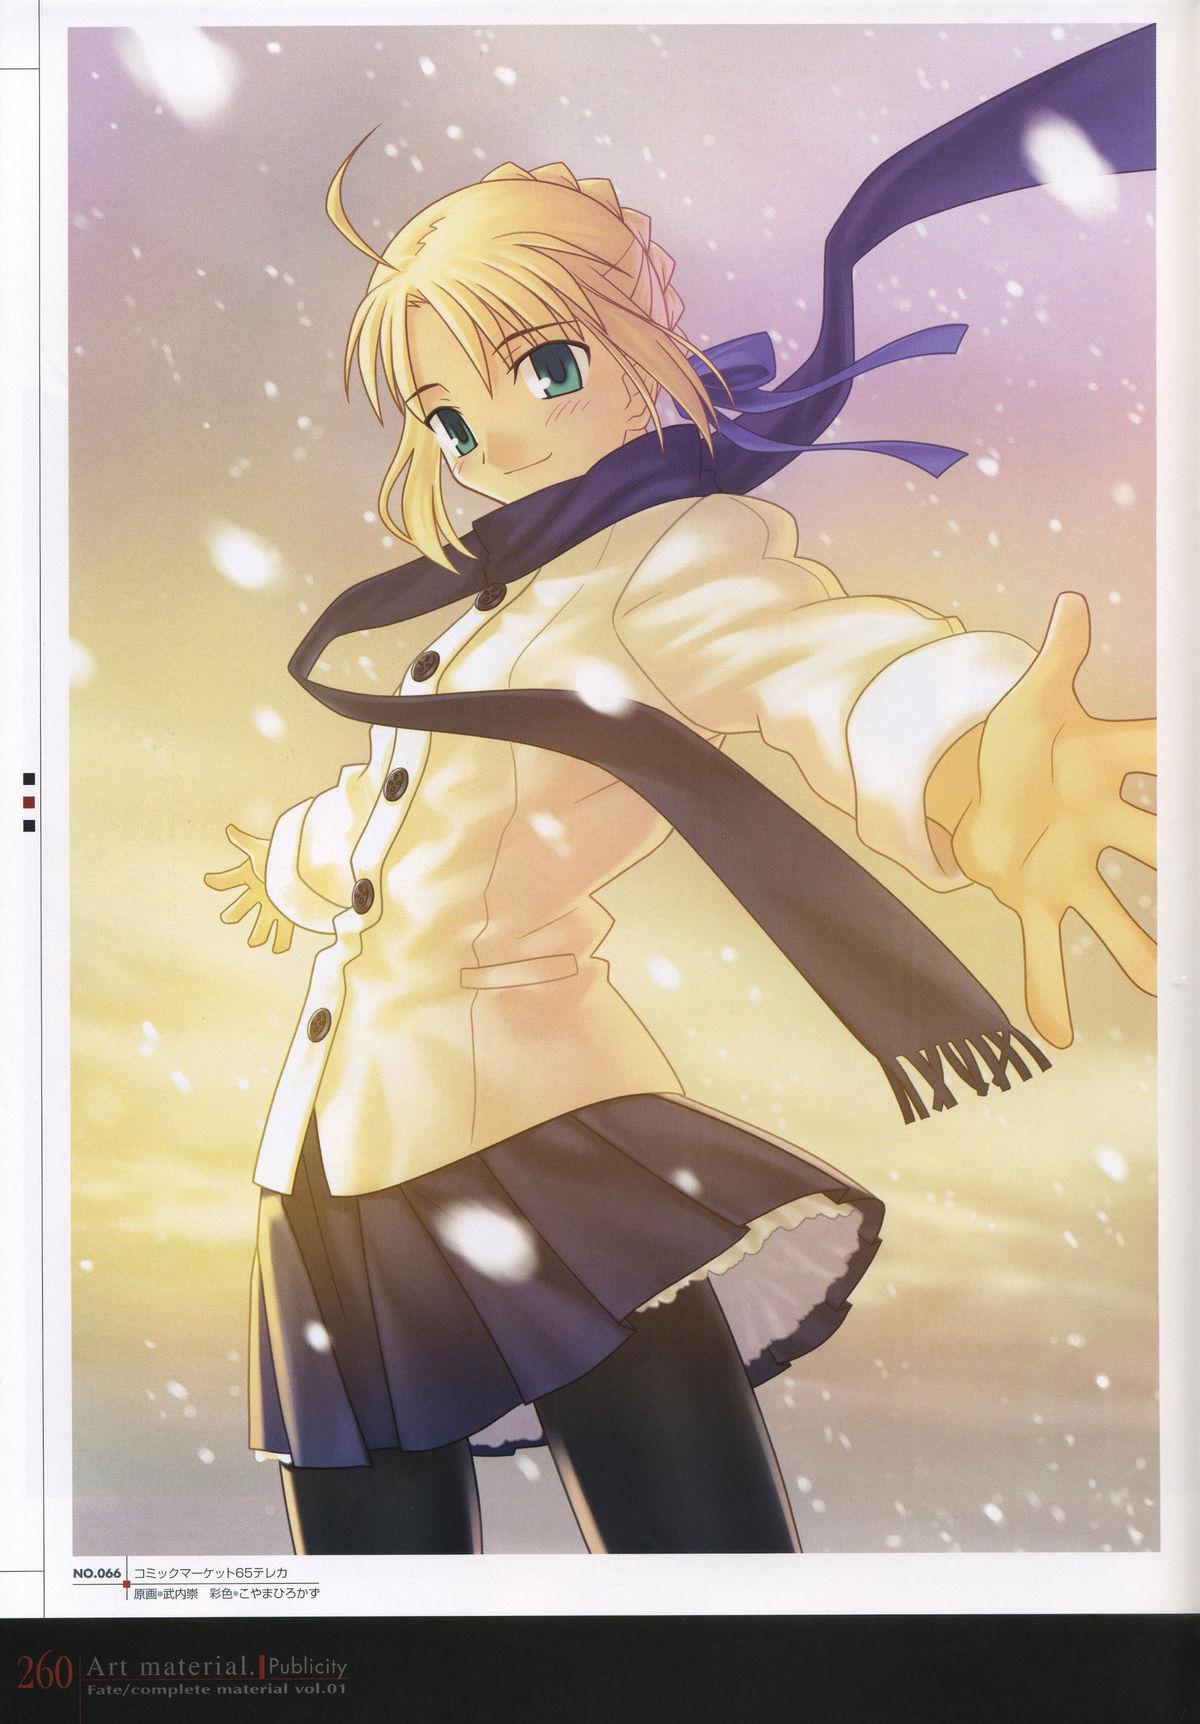 Fate/complete material I - Art material. 264